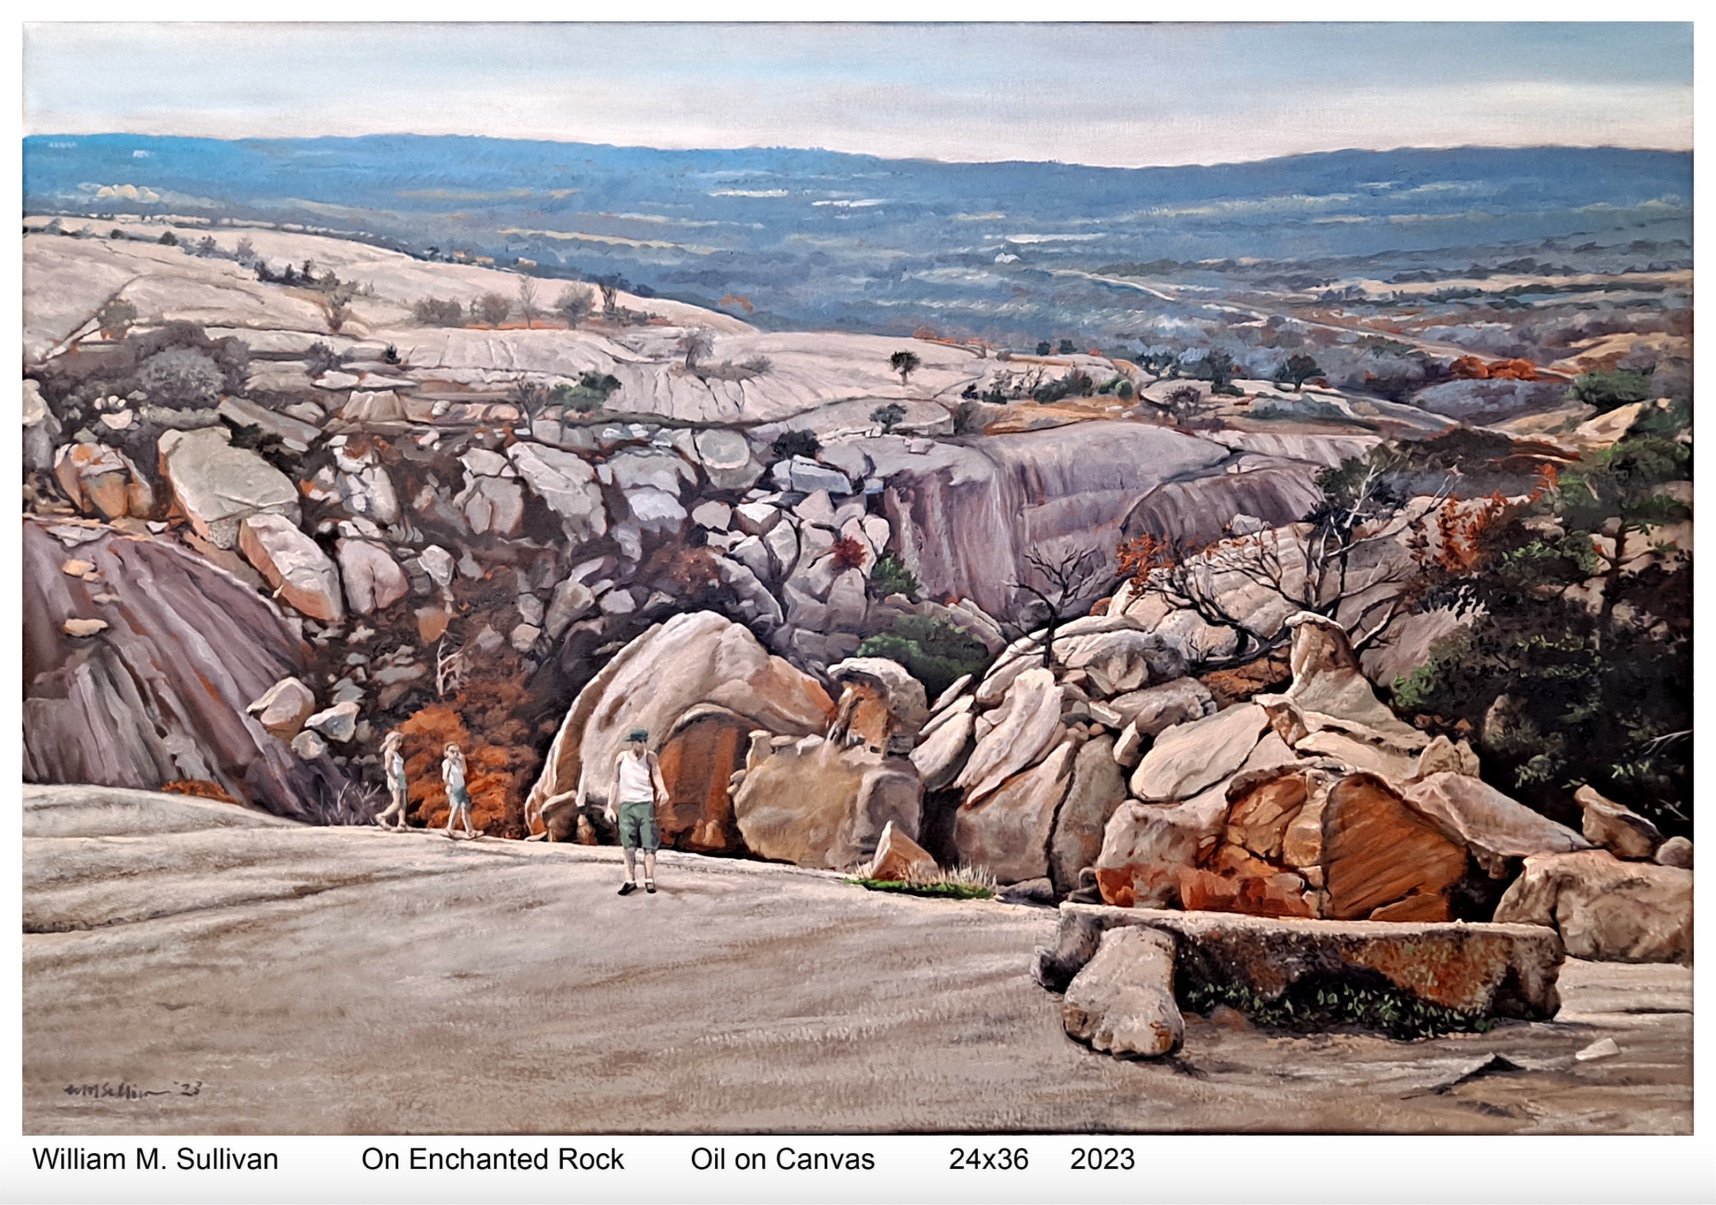 “On Enchanted Rock” by William M. Sullivan